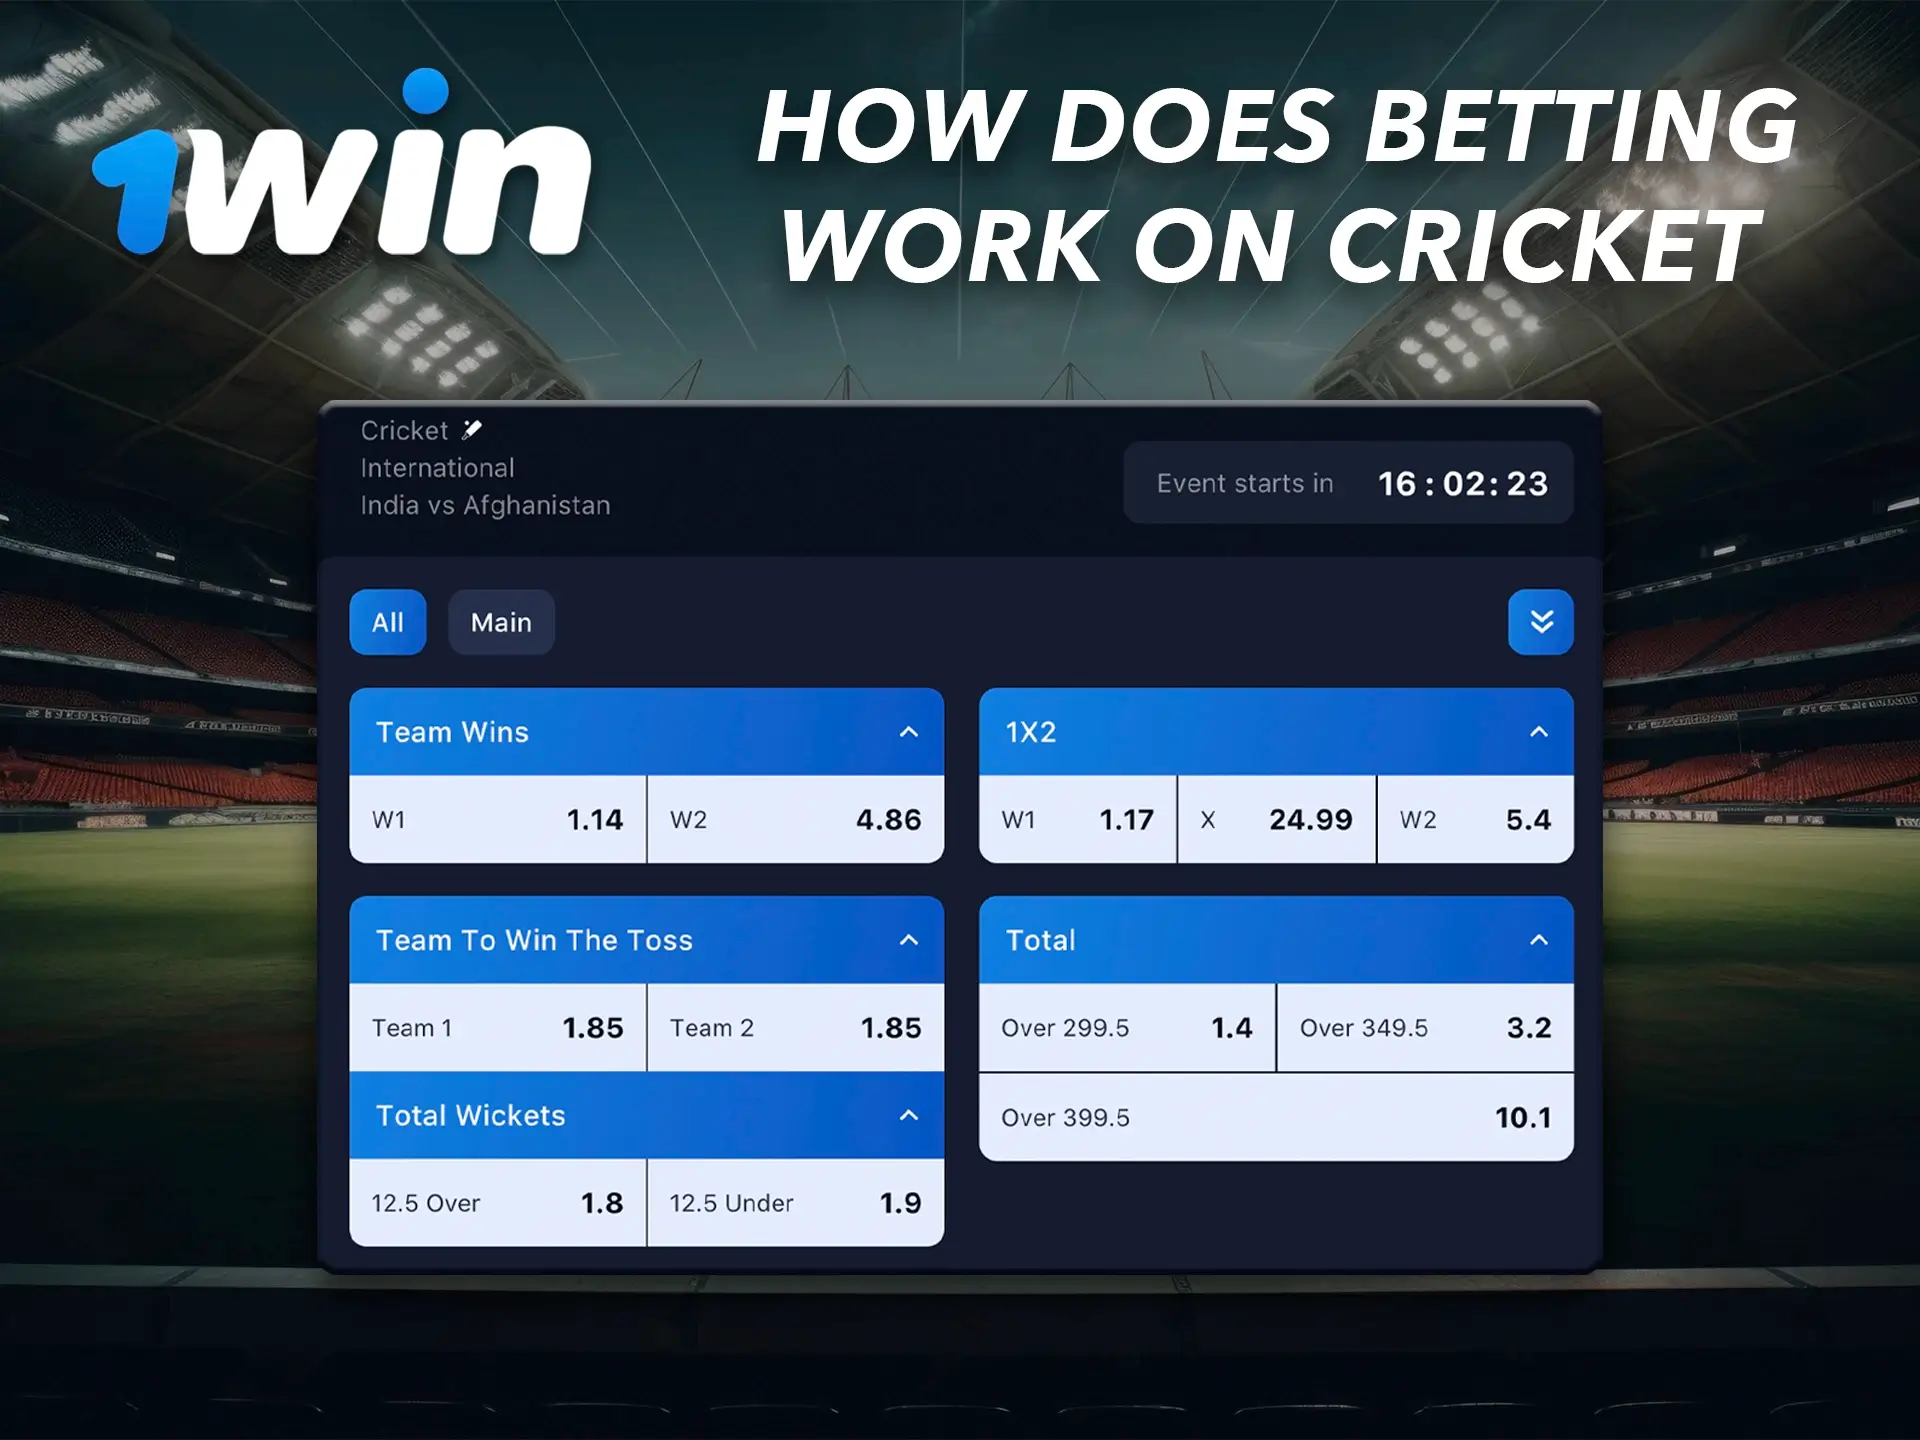 1Win has a simple interface where even beginners can bet on cricket.